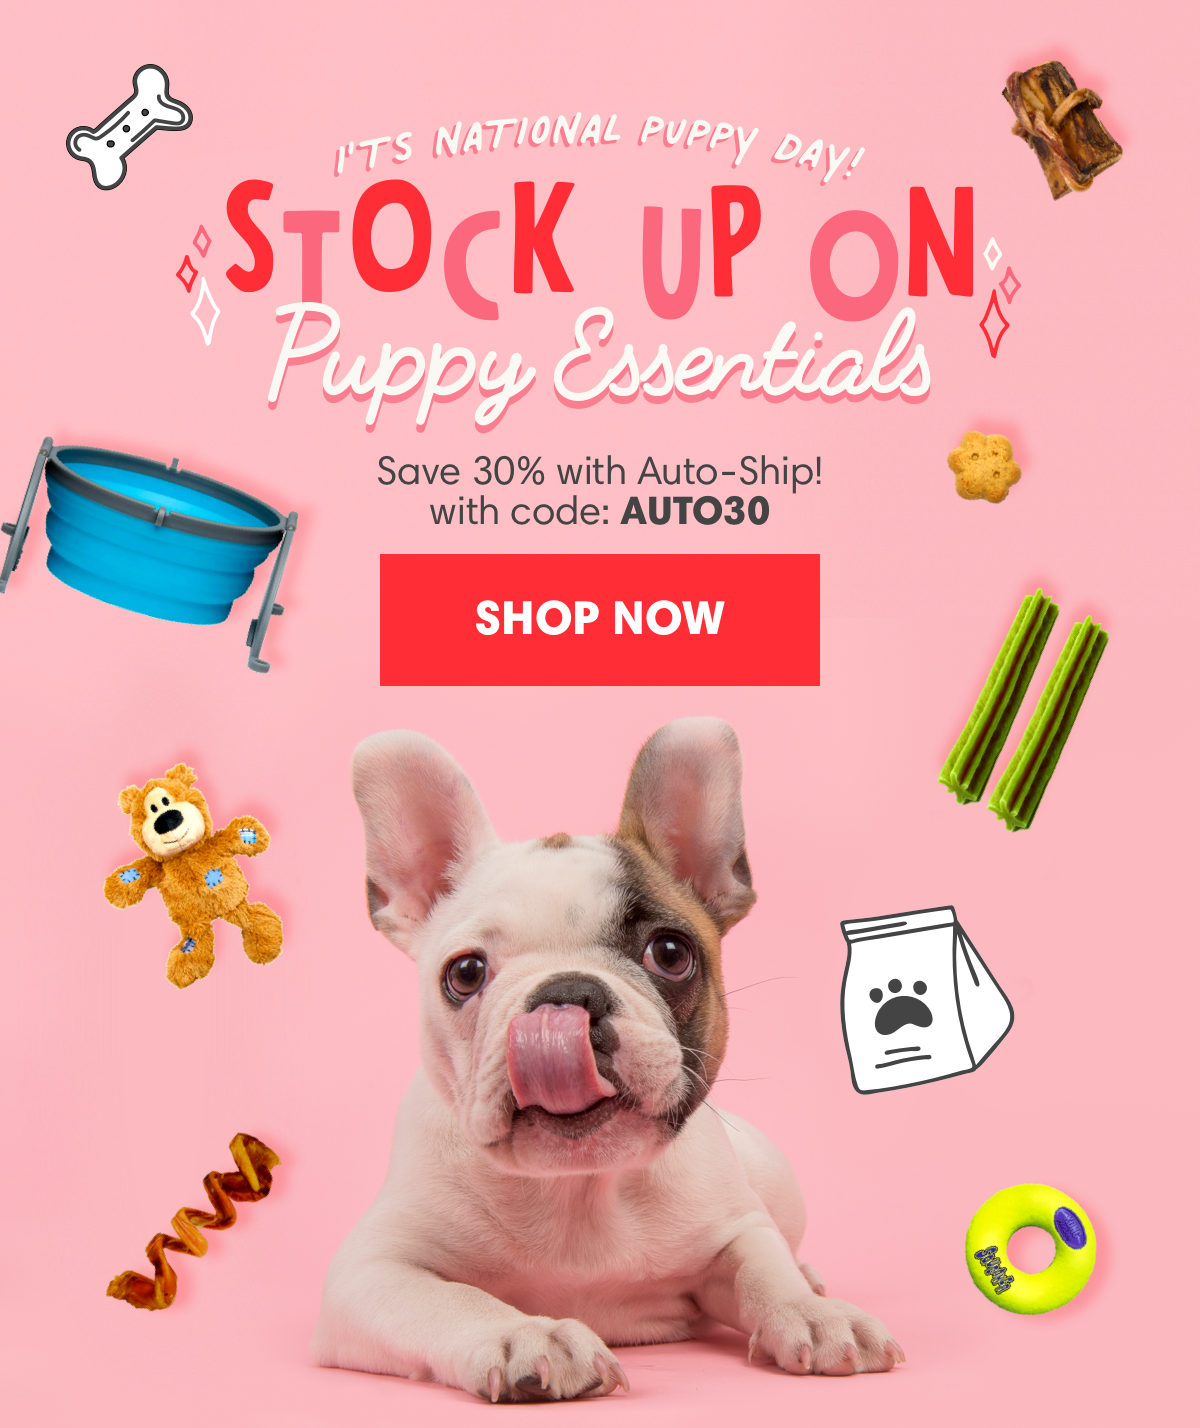 National Puppy Day August newsletter by Petflow